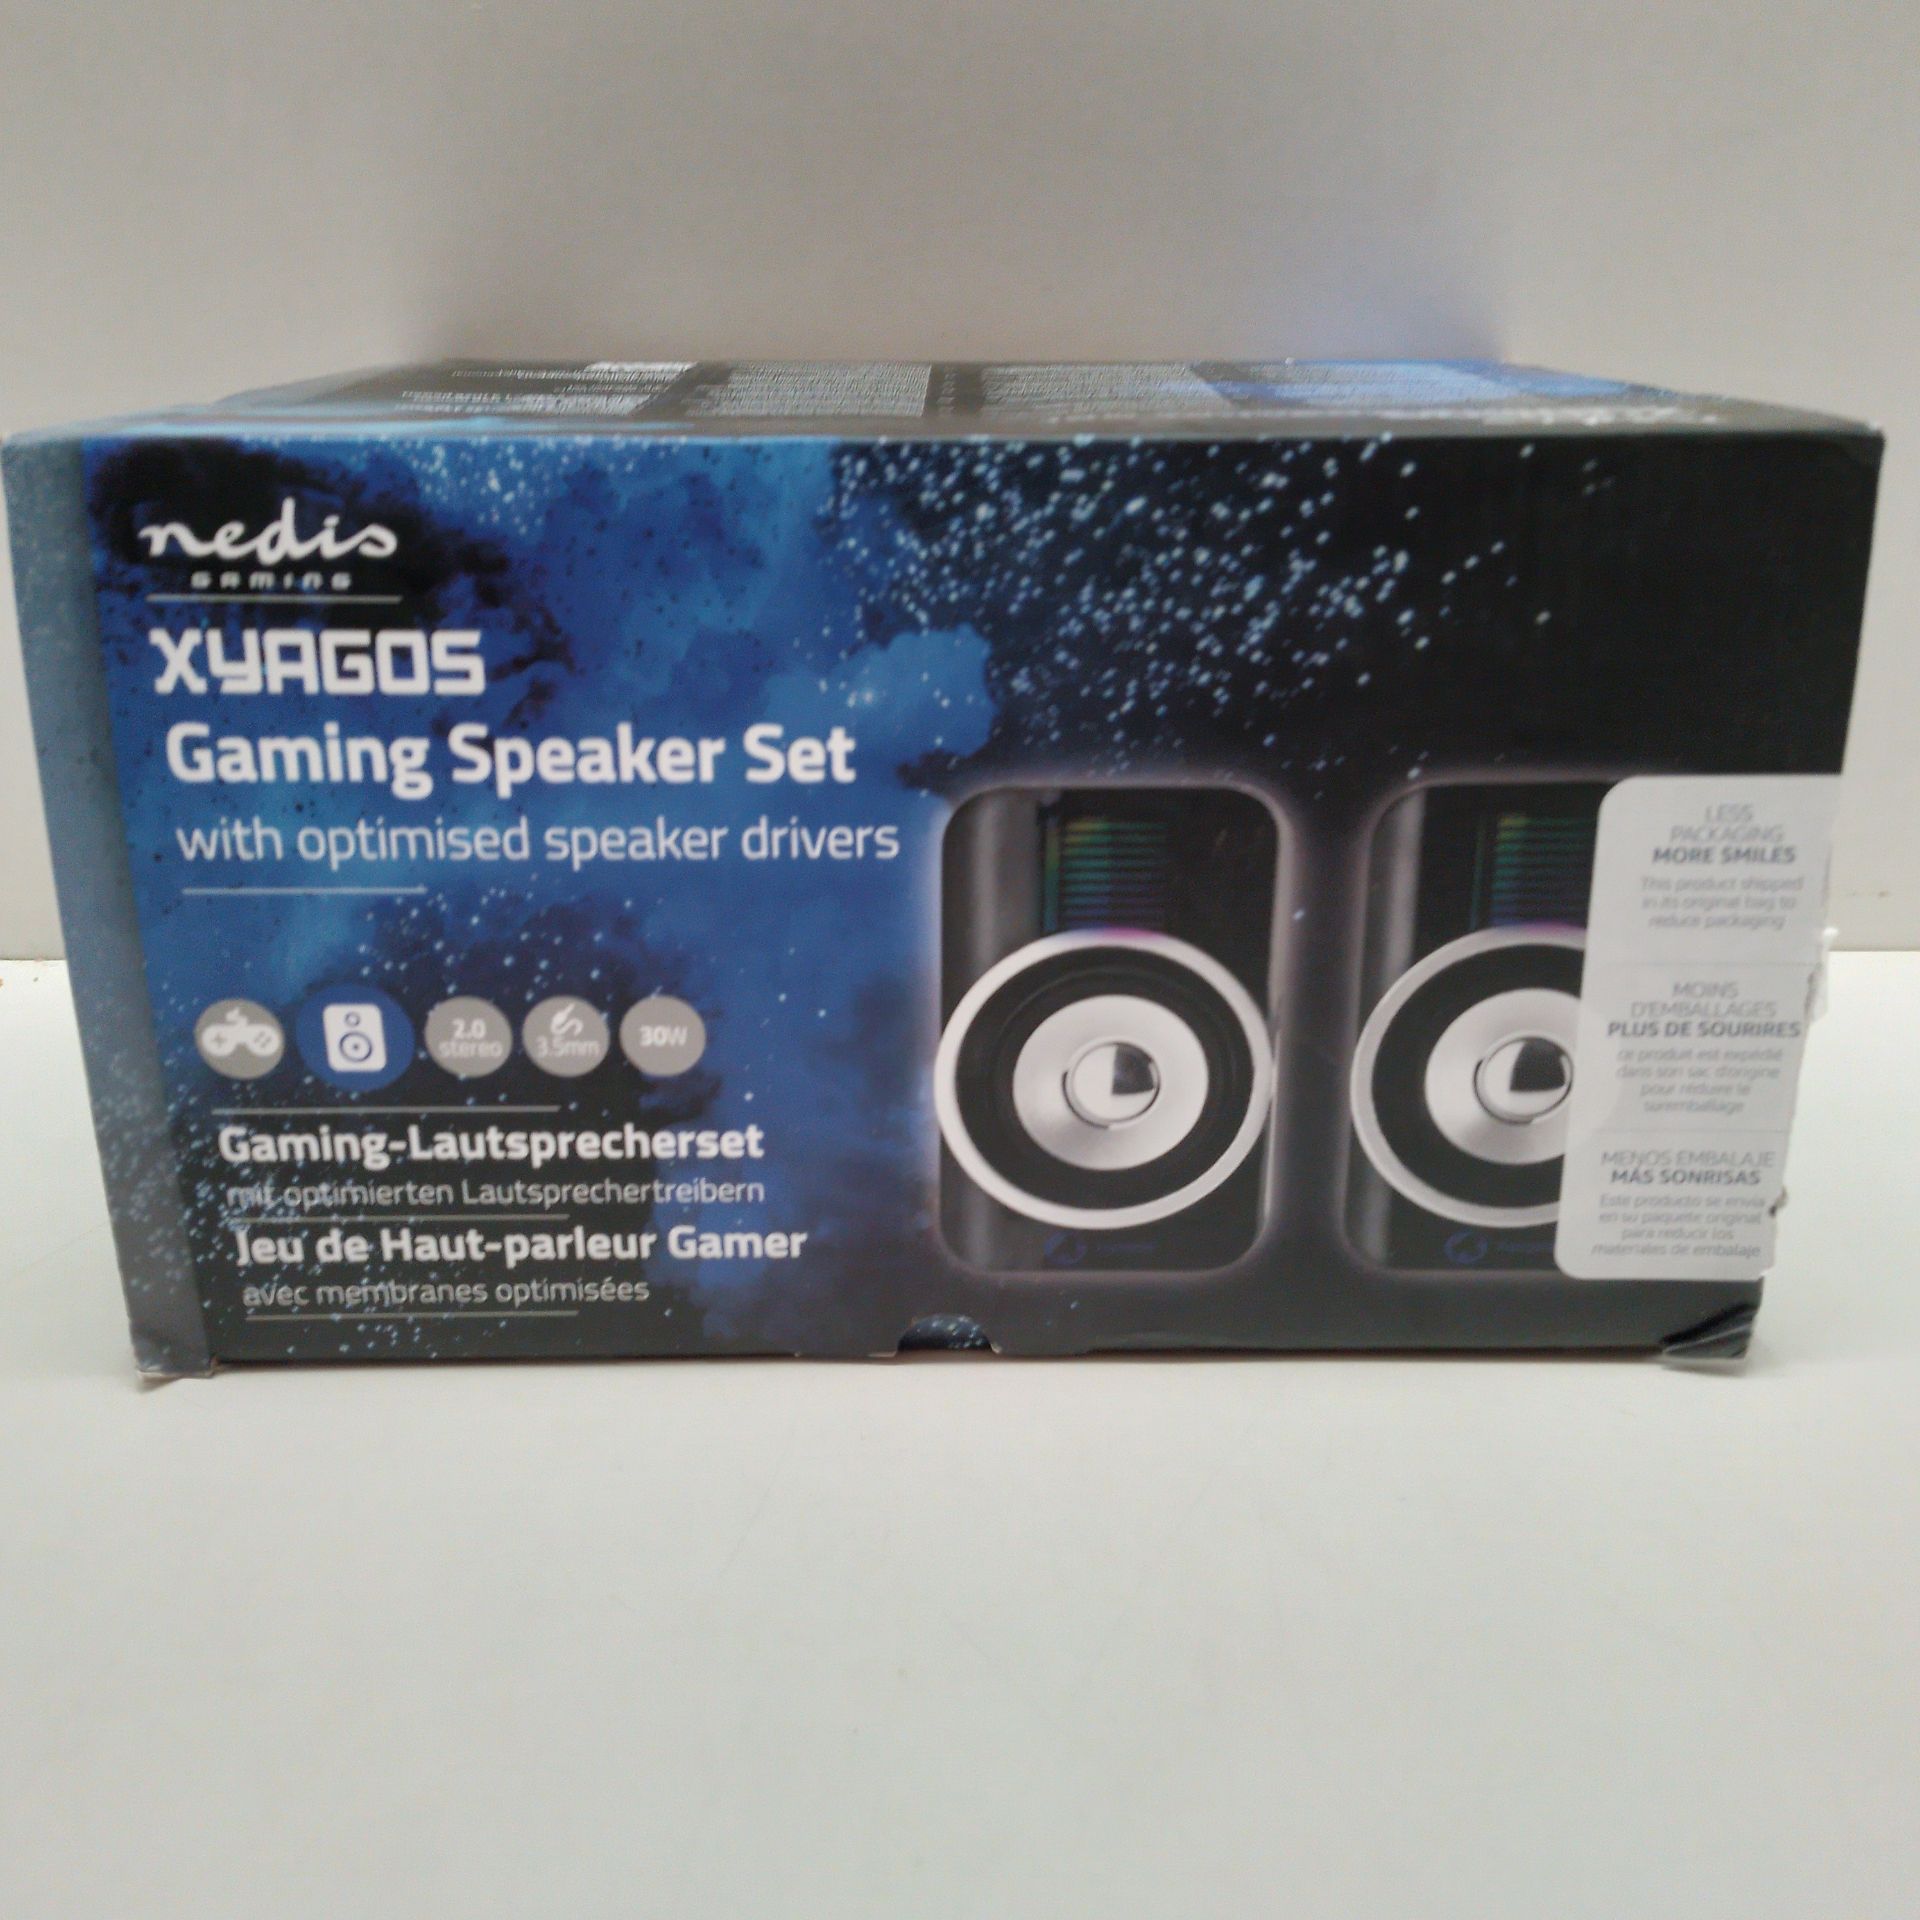 RRP £11.15 Nedis Gaming Speakers 2.0 of 30W for PC and Laptops with RGB - Image 2 of 2